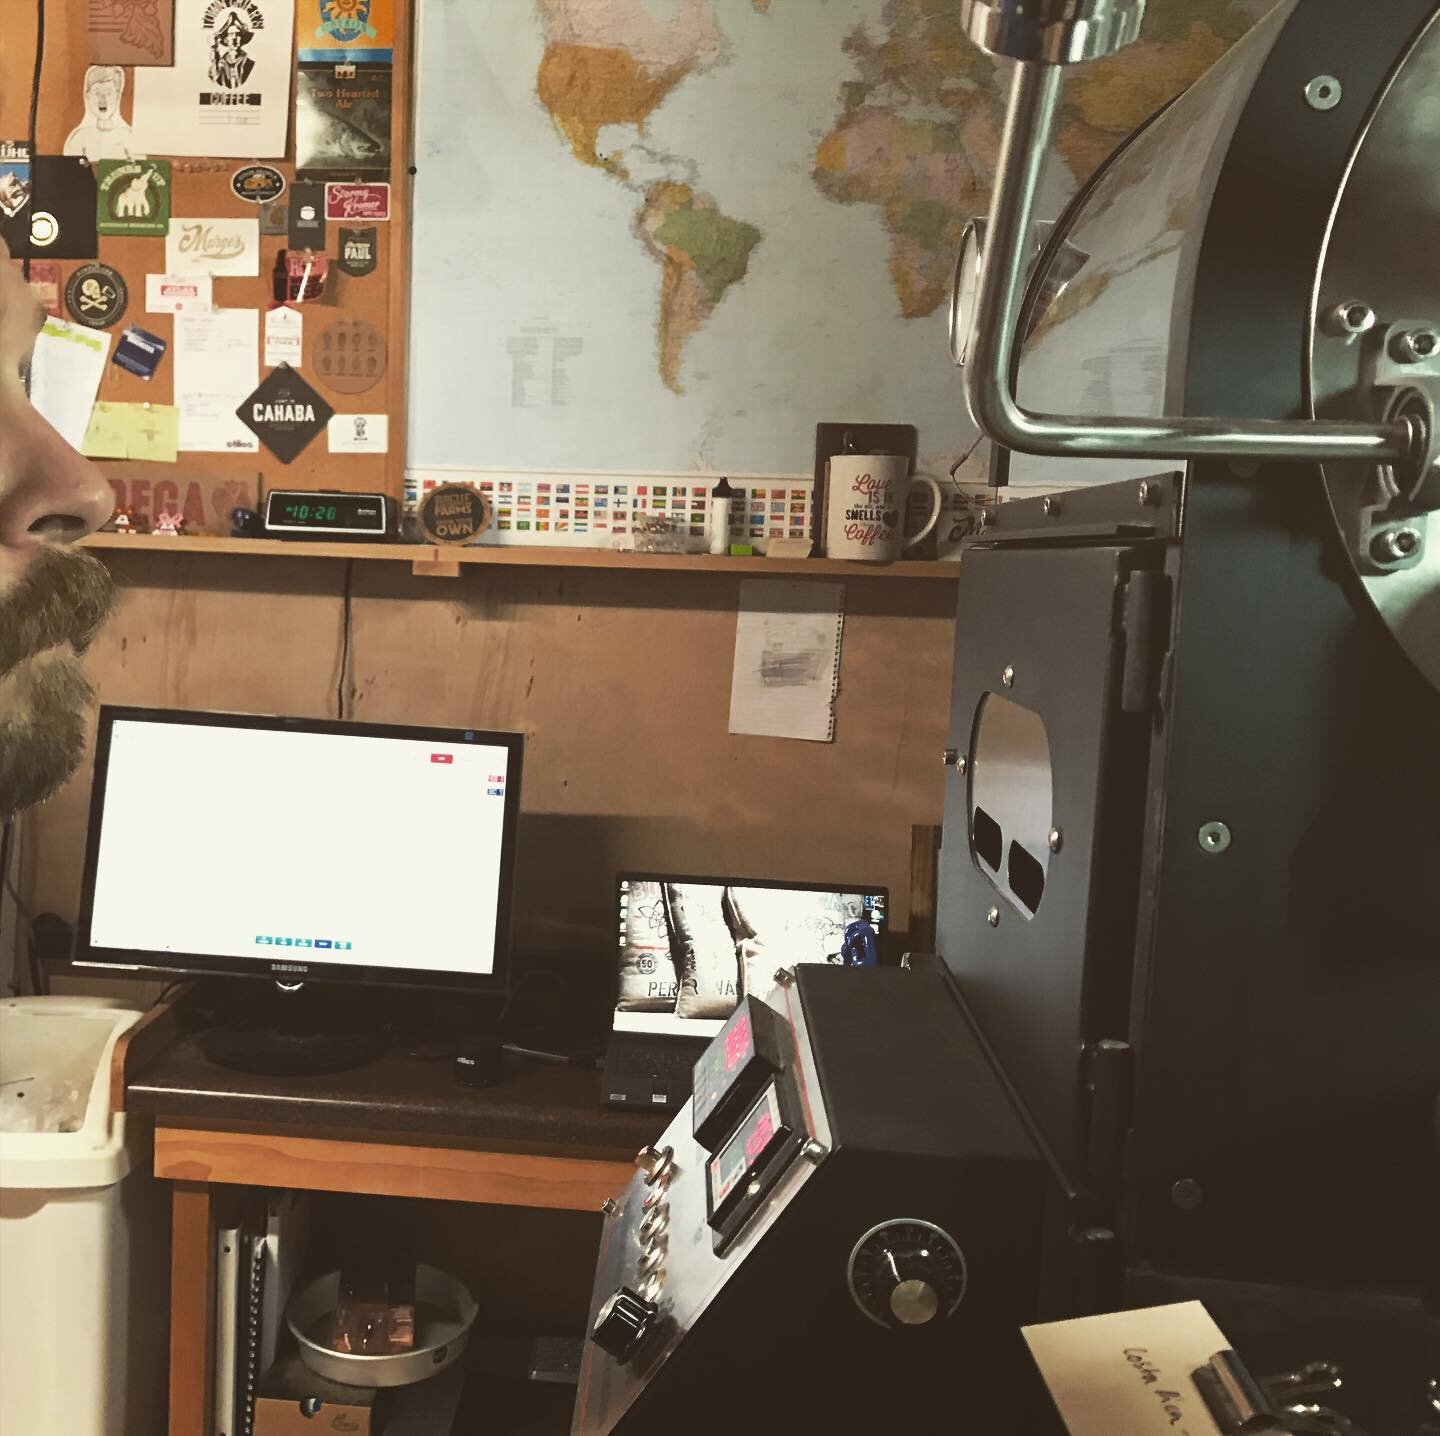 Another Saturday morning at the helm. Thanks for the orders!
.
.
.
.
.
#towncrierscoffee #coffee #coffeeroaster